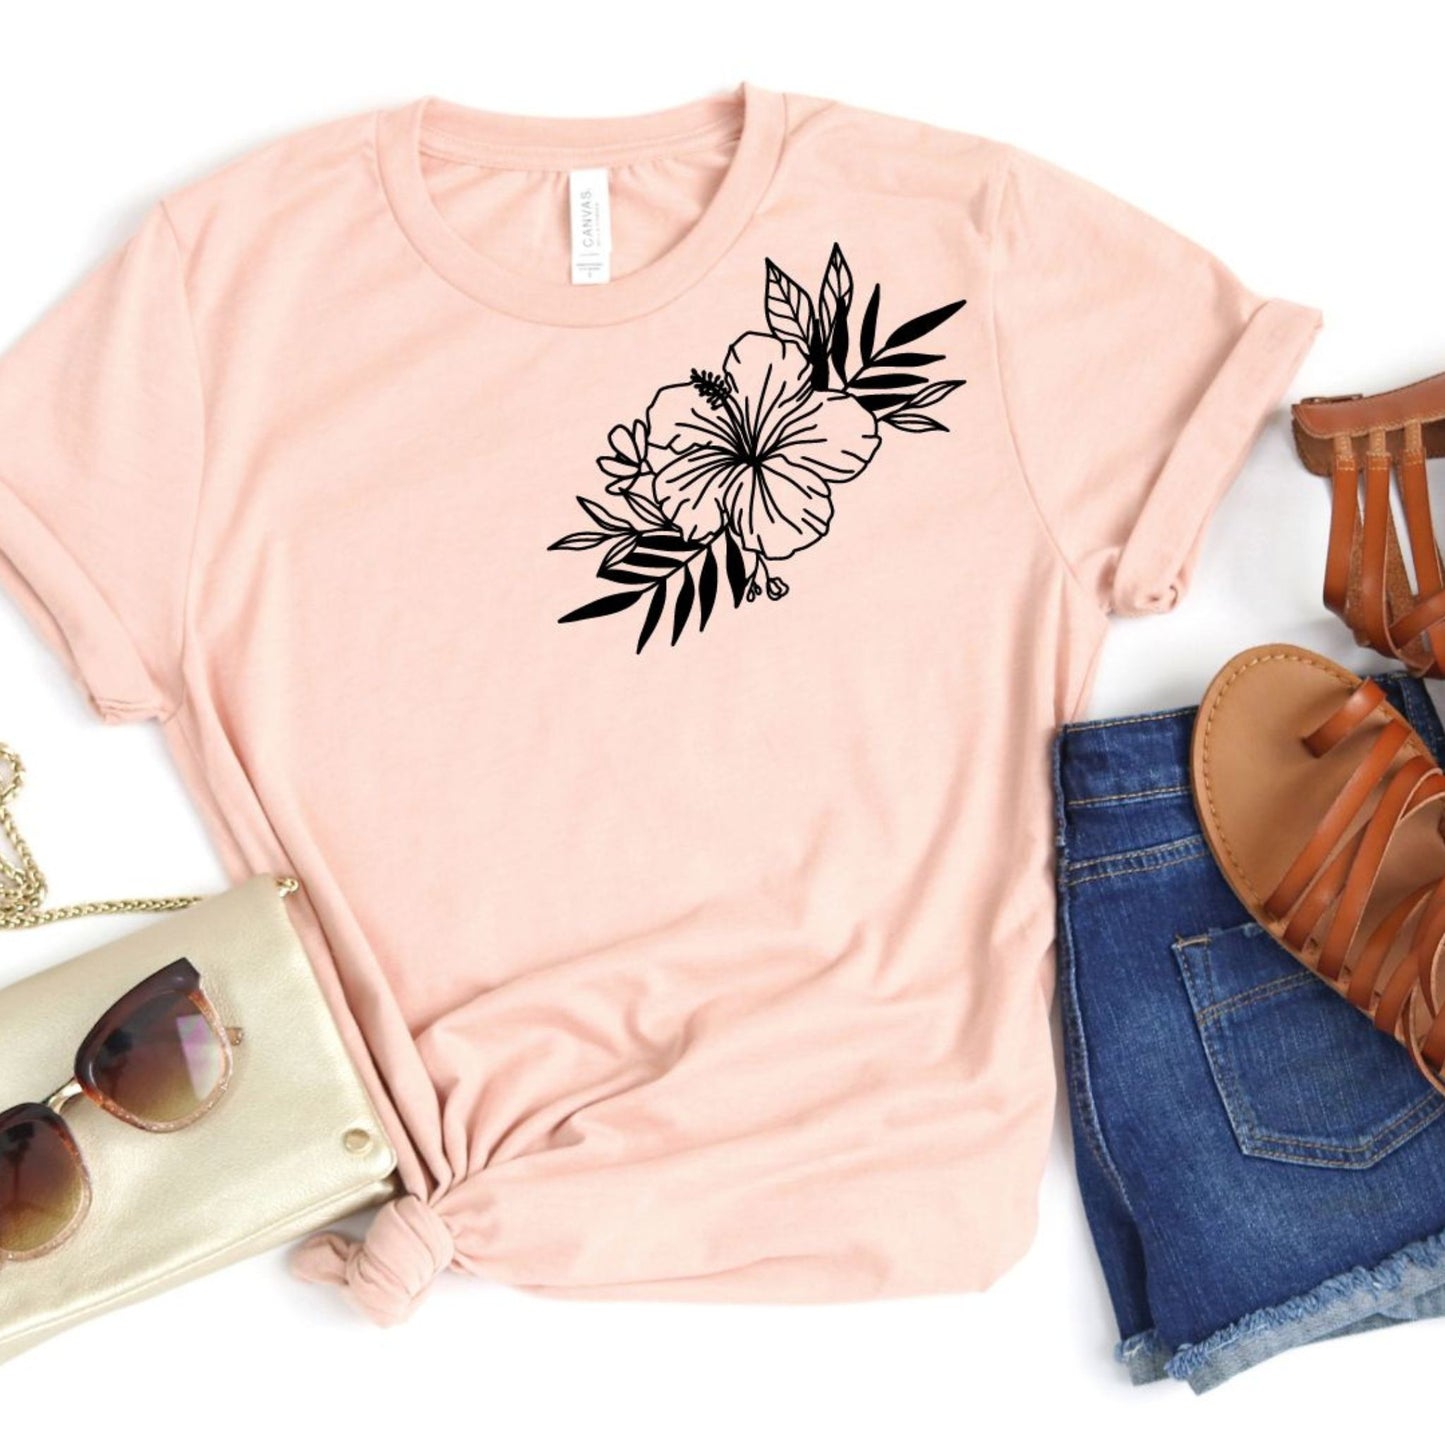 Hibiscus Graphic Tee in Heather Peach